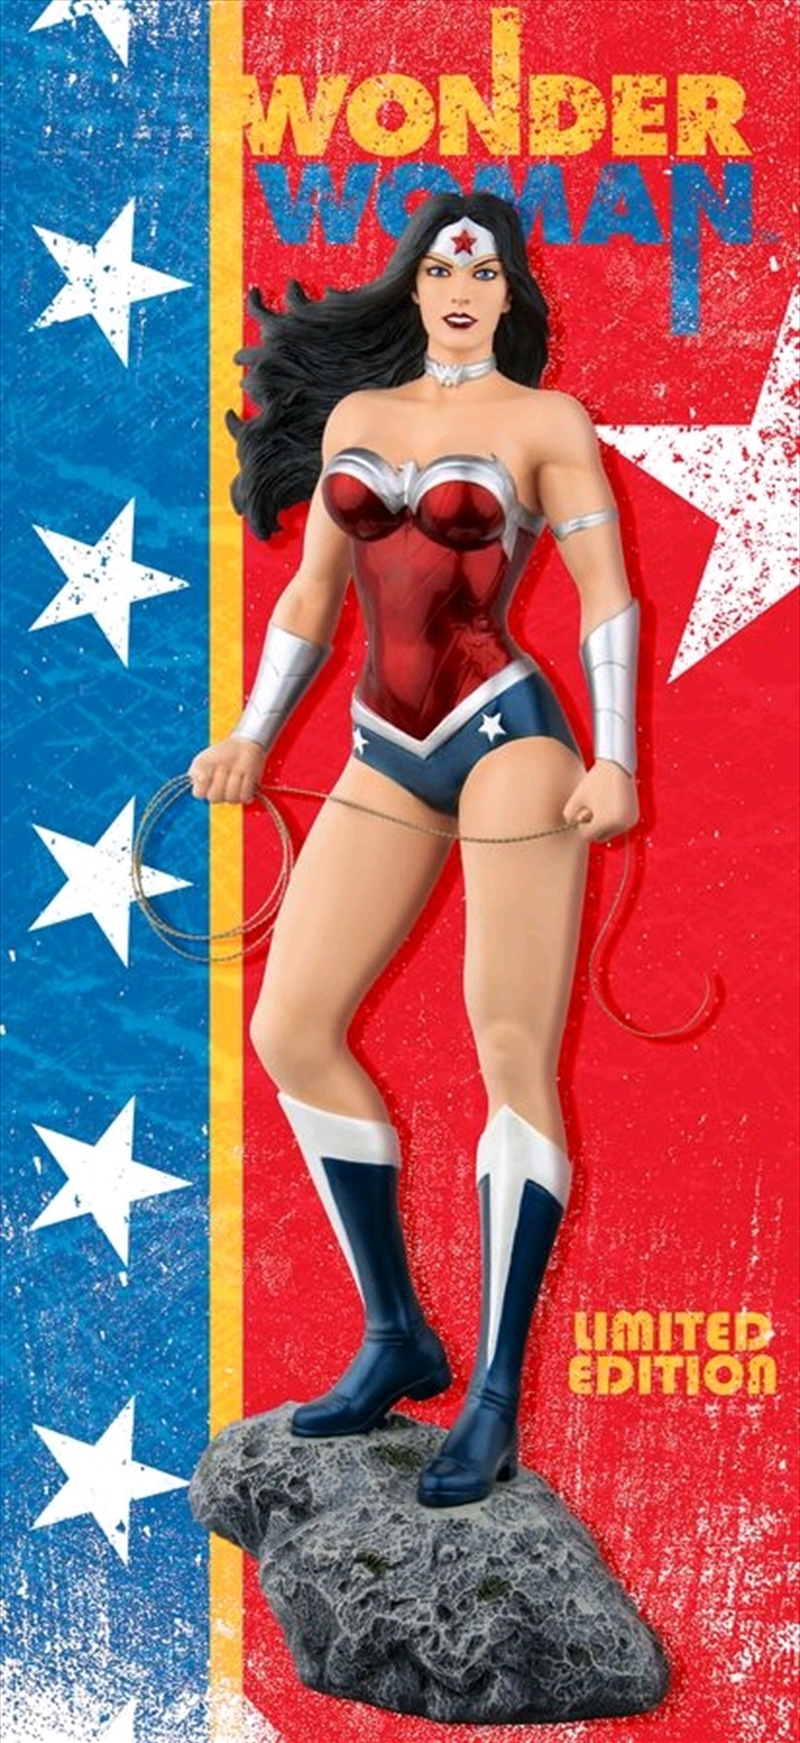 Wonder Woman - New 52 1:6th Scale Limited Edition Statue/Product Detail/Statues